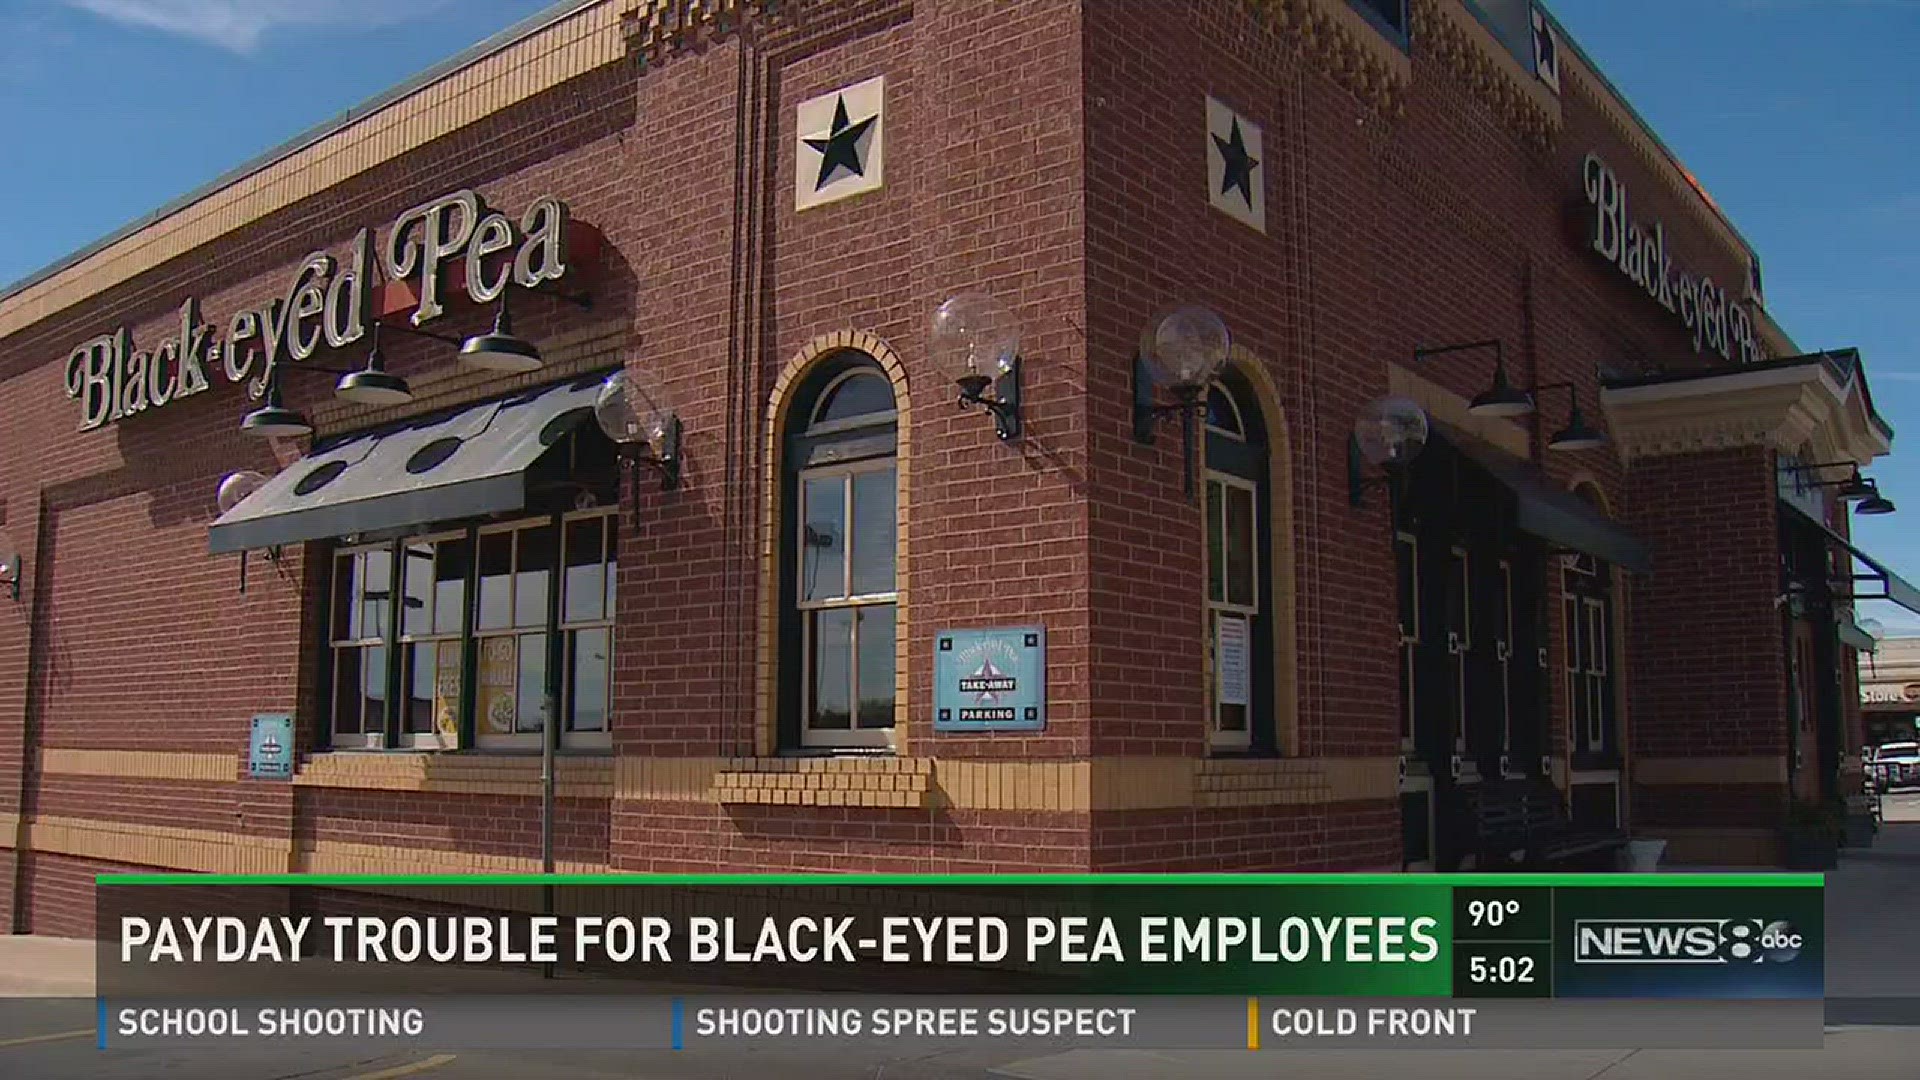 Workers at the now-closed Black-eyed Pea locations in North Texas said paychecks didn't come on payday Wednesday, and they don't know why. Lauren Zakalik reports.